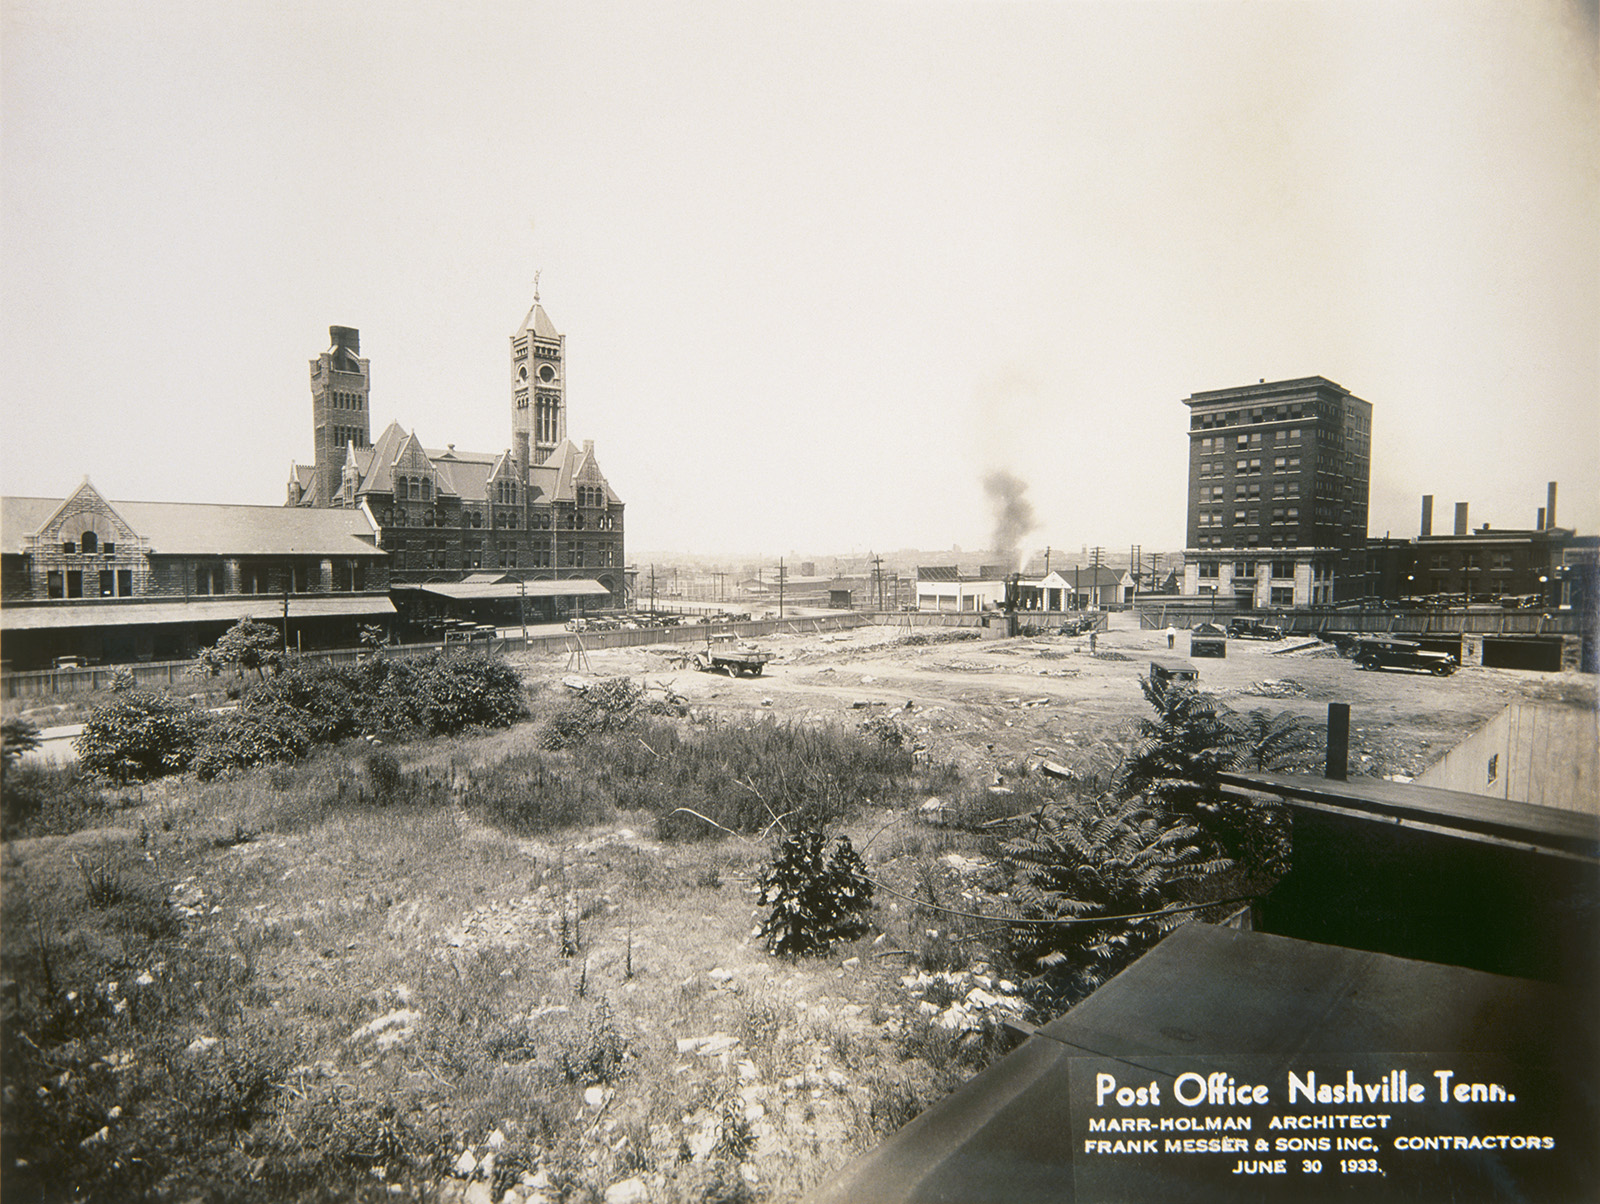 A field –soon to be the site of the city’s main post office. Union Station and the train station’s baggage building and one seven story building appear in the background.